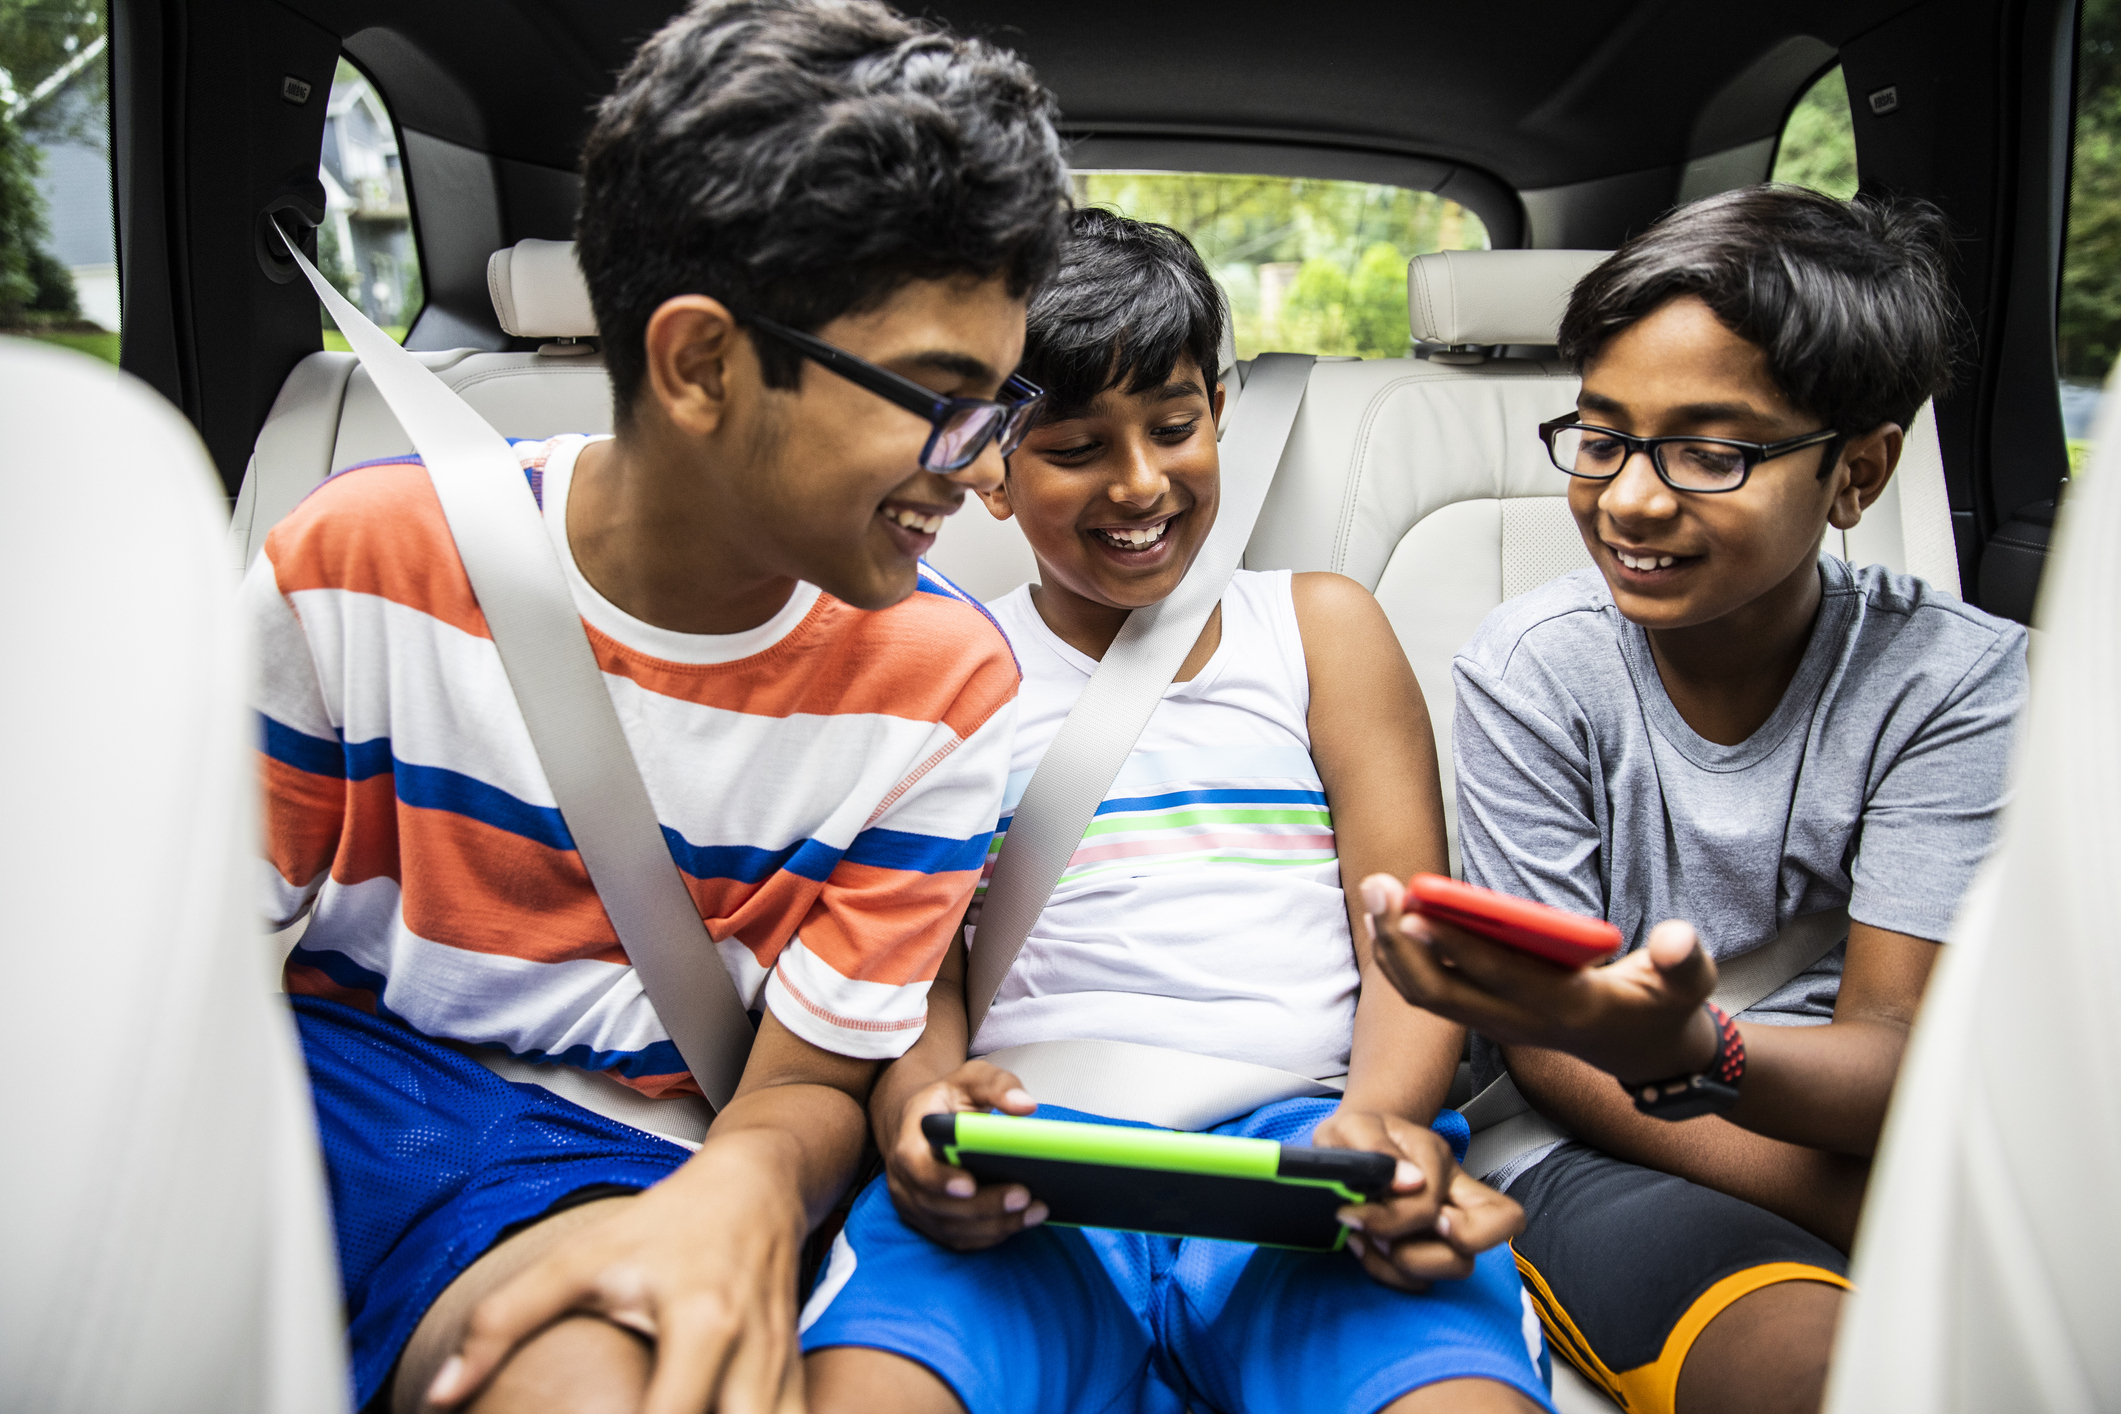 Three siblings in a car use hand-held gaming devices, laughing and smiling